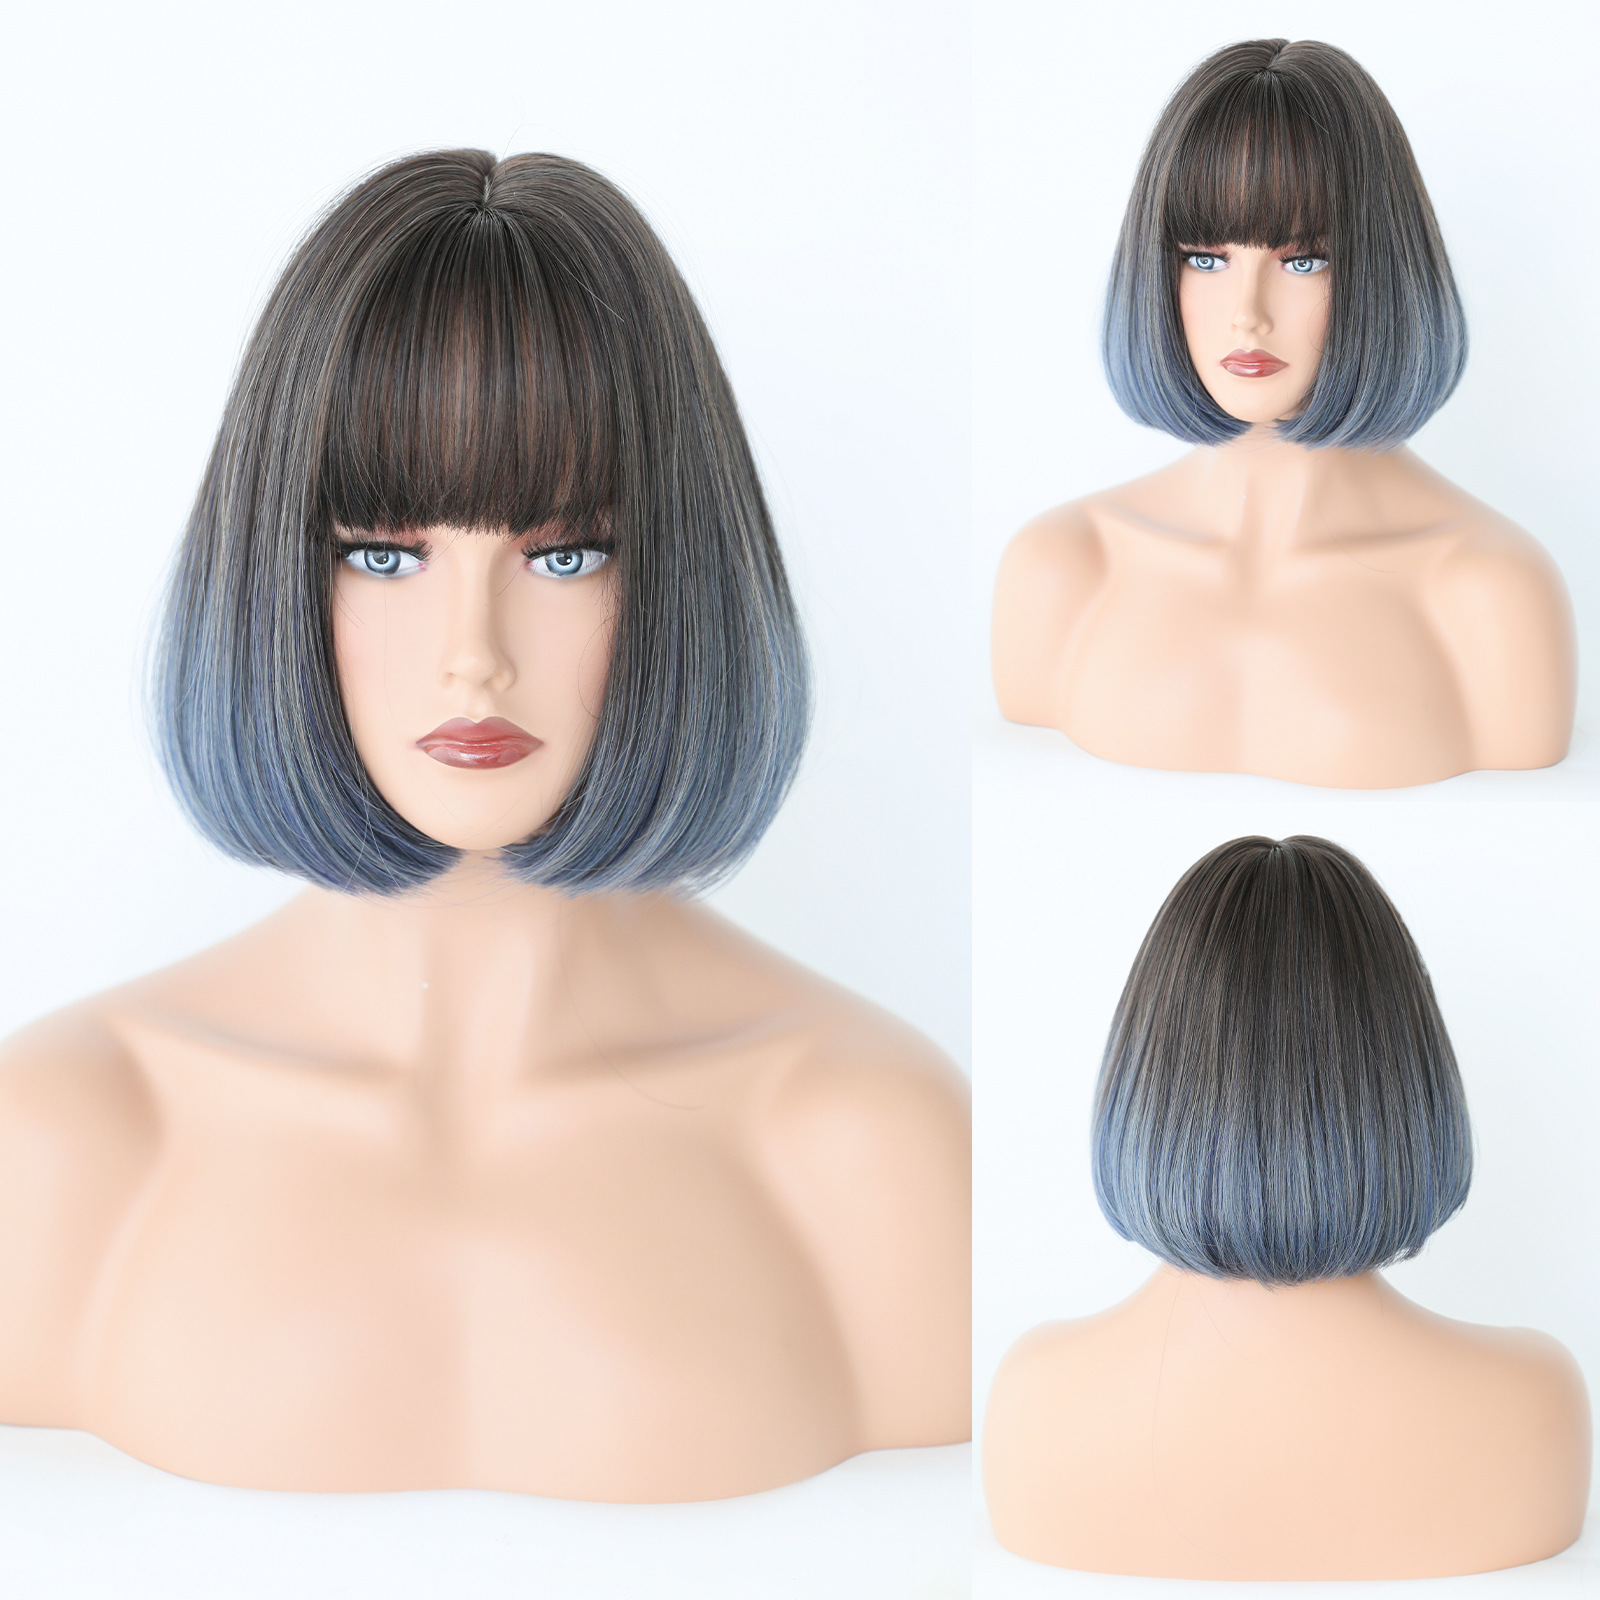 A synthetic wig featuring female short hair in a BOB head style with a gradient color and bangs, offering a stylish and effortless design for a fashionable look